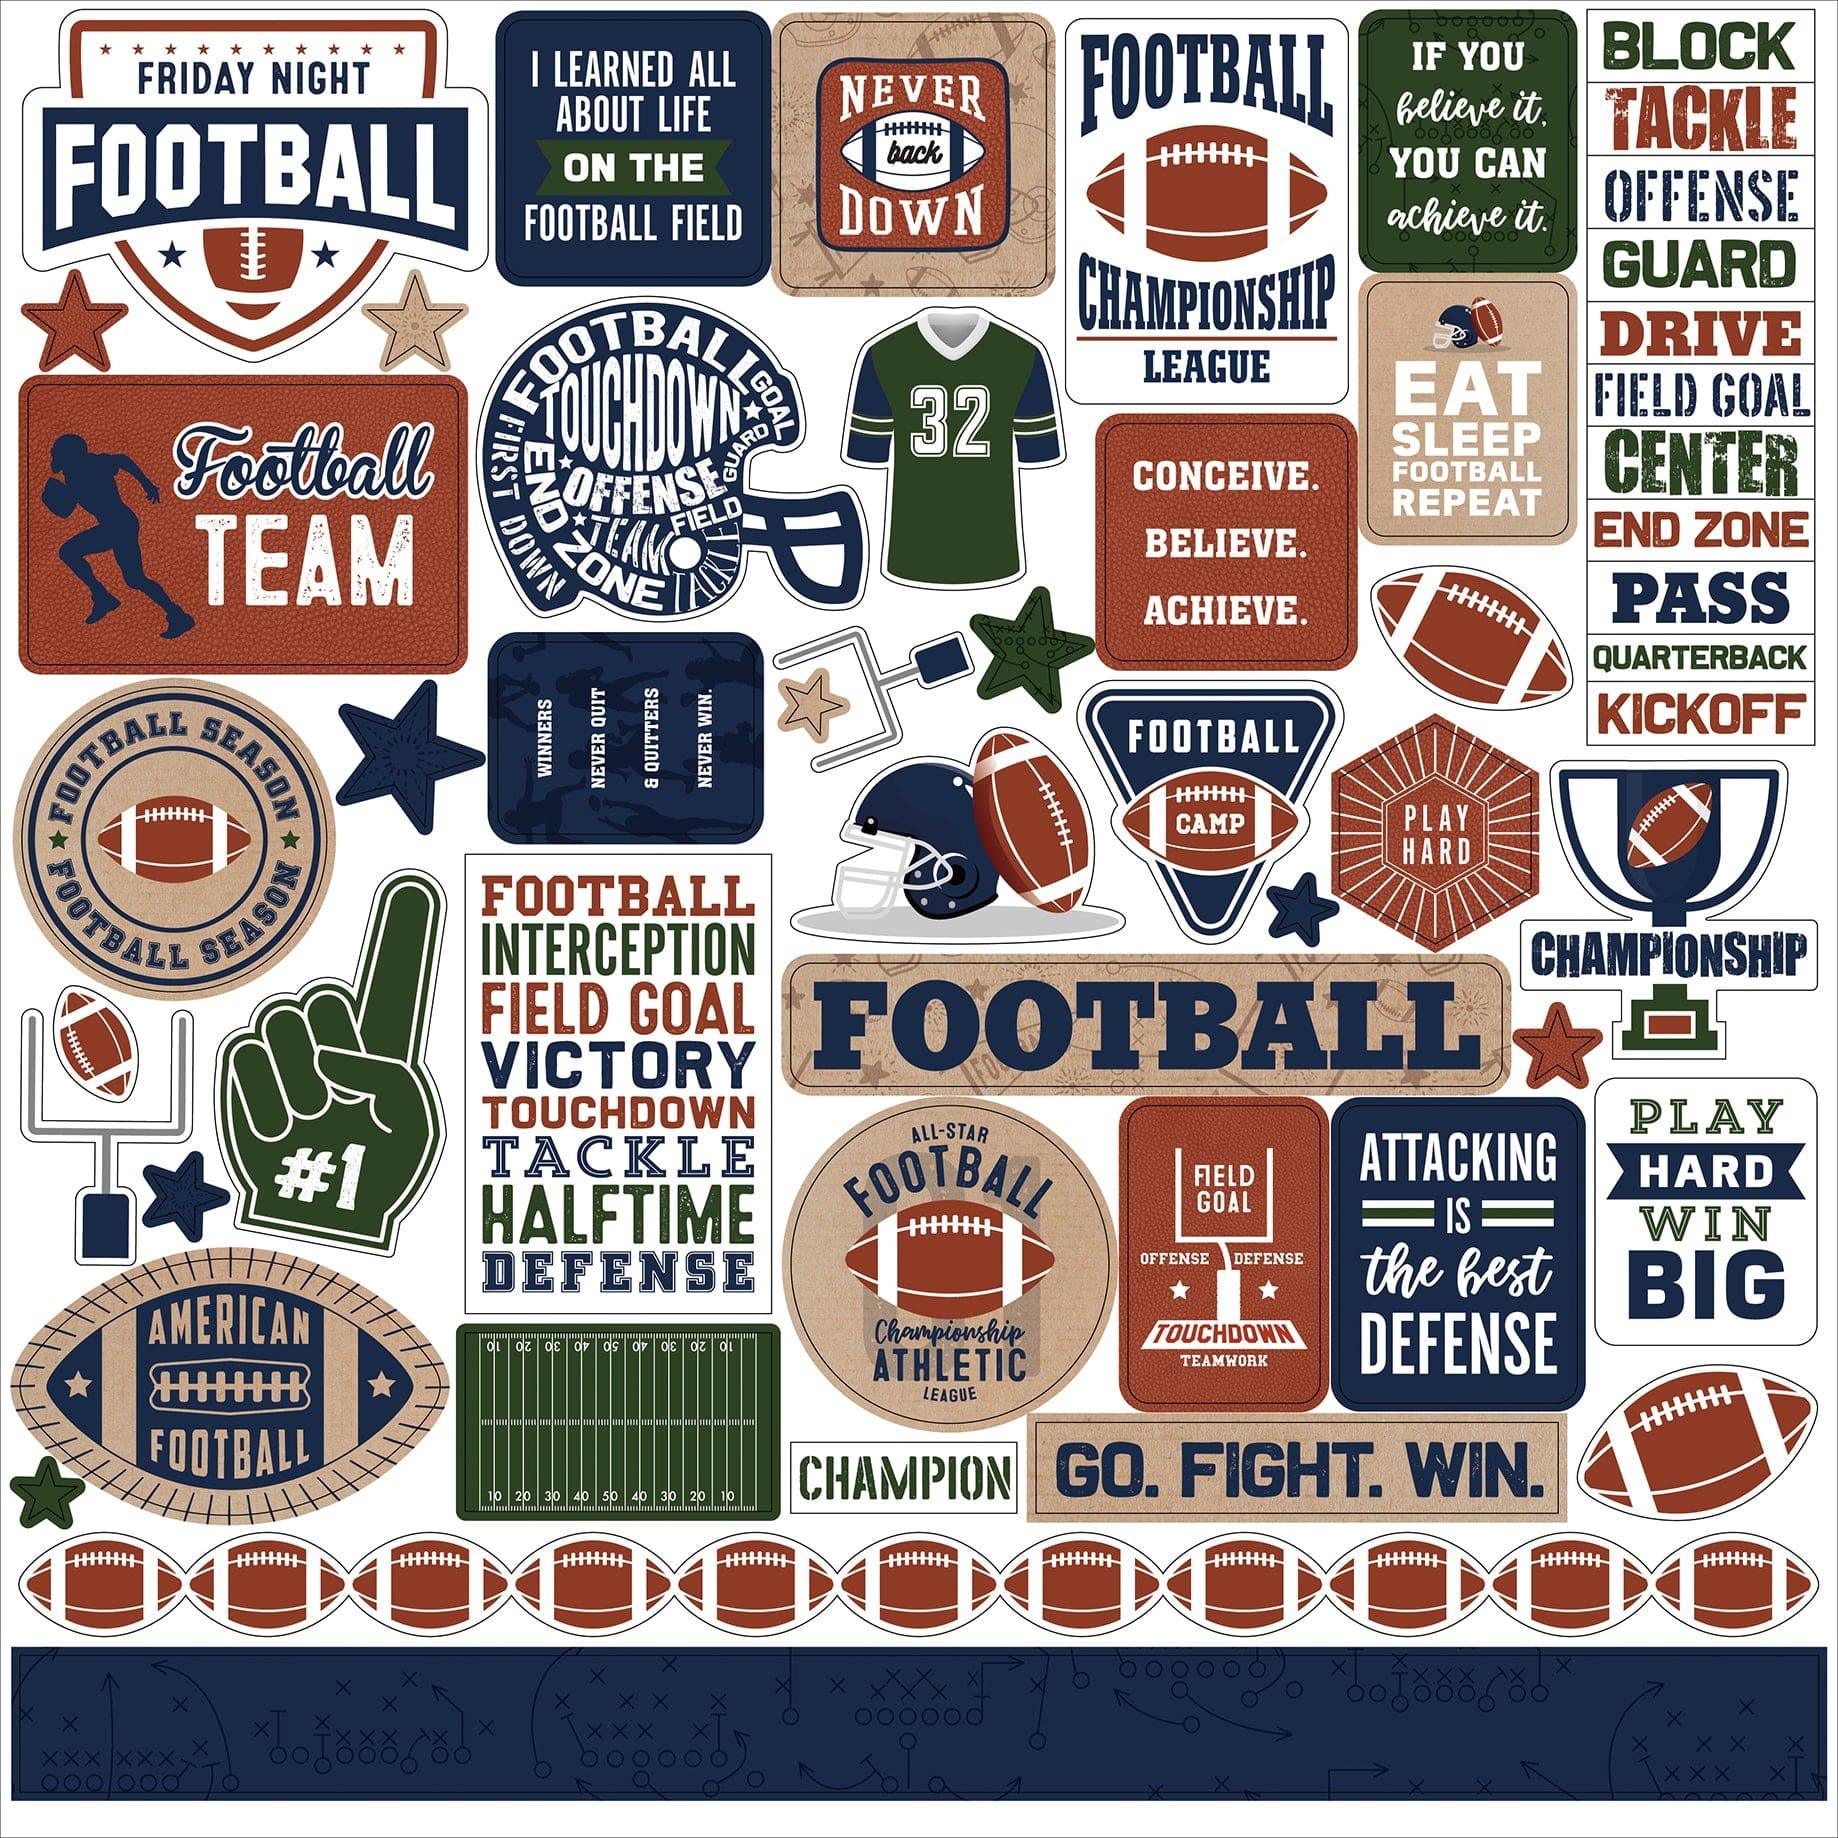 Football Collection 12 x 12 Double-Sided Scrapbook Paper Kit & Sticker Sheet by Echo Park Paper - 13 Pieces - Scrapbook Supply Companies